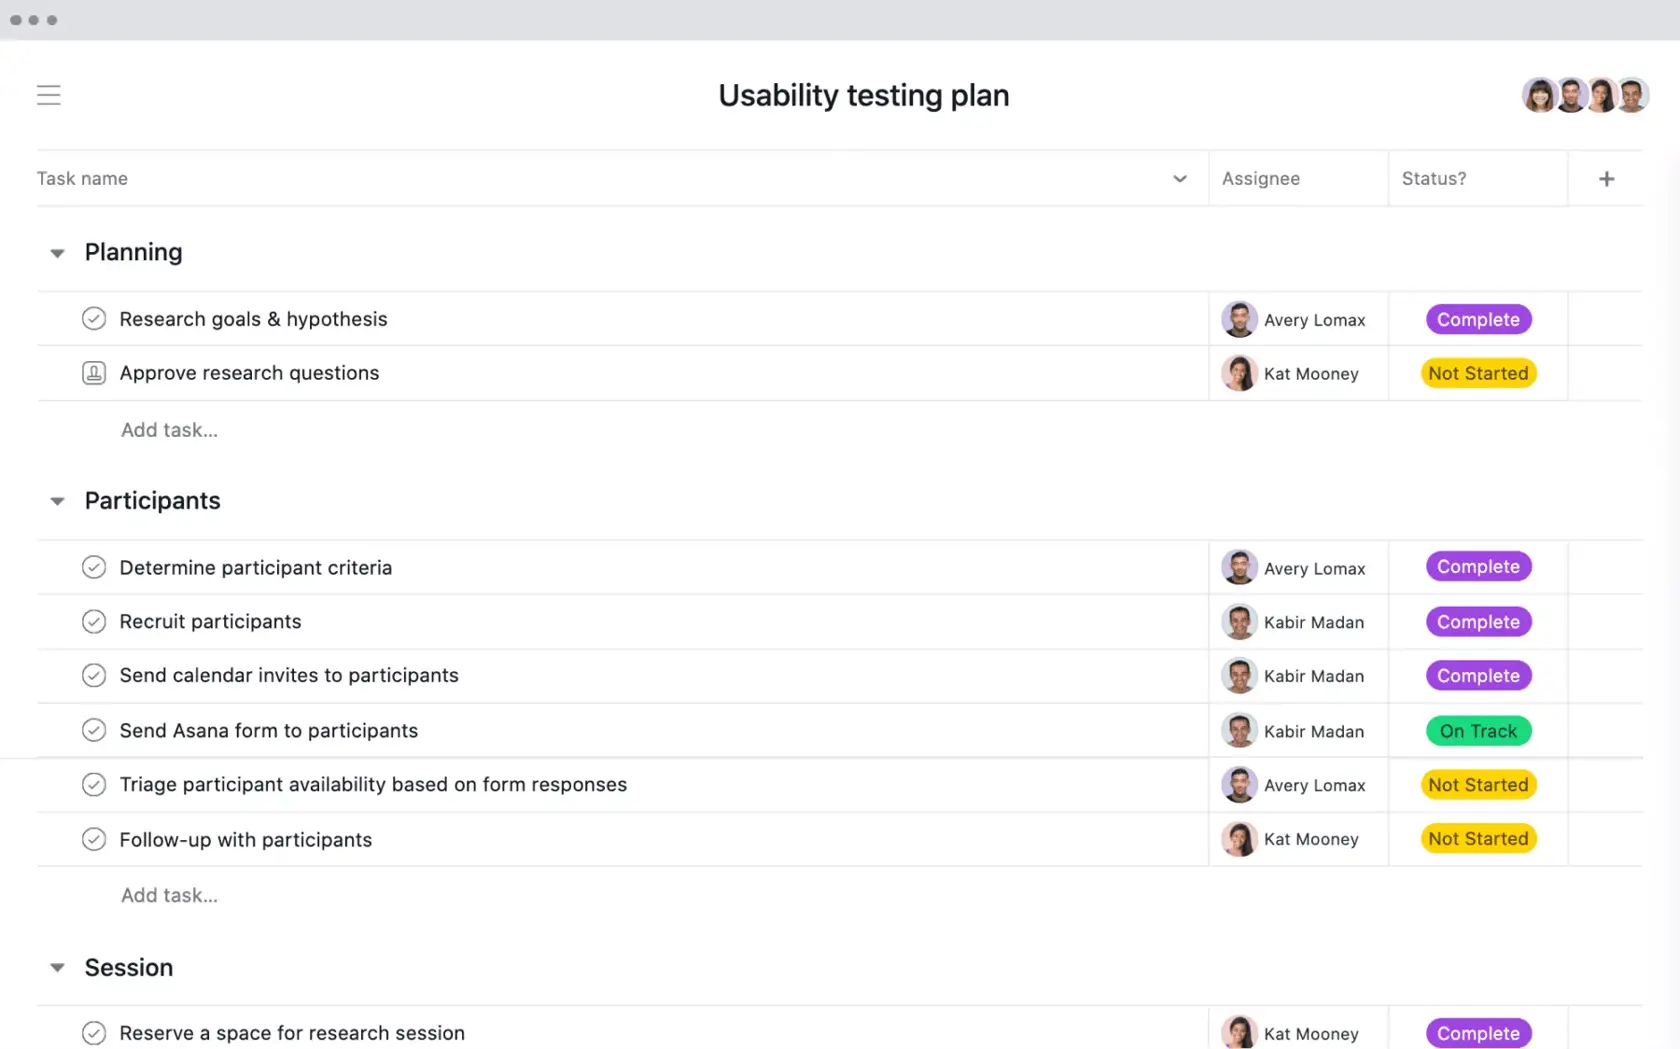 [Old Product UI] Usability testing project in Asana, spreadsheet-style view with project deliverables (Lists)